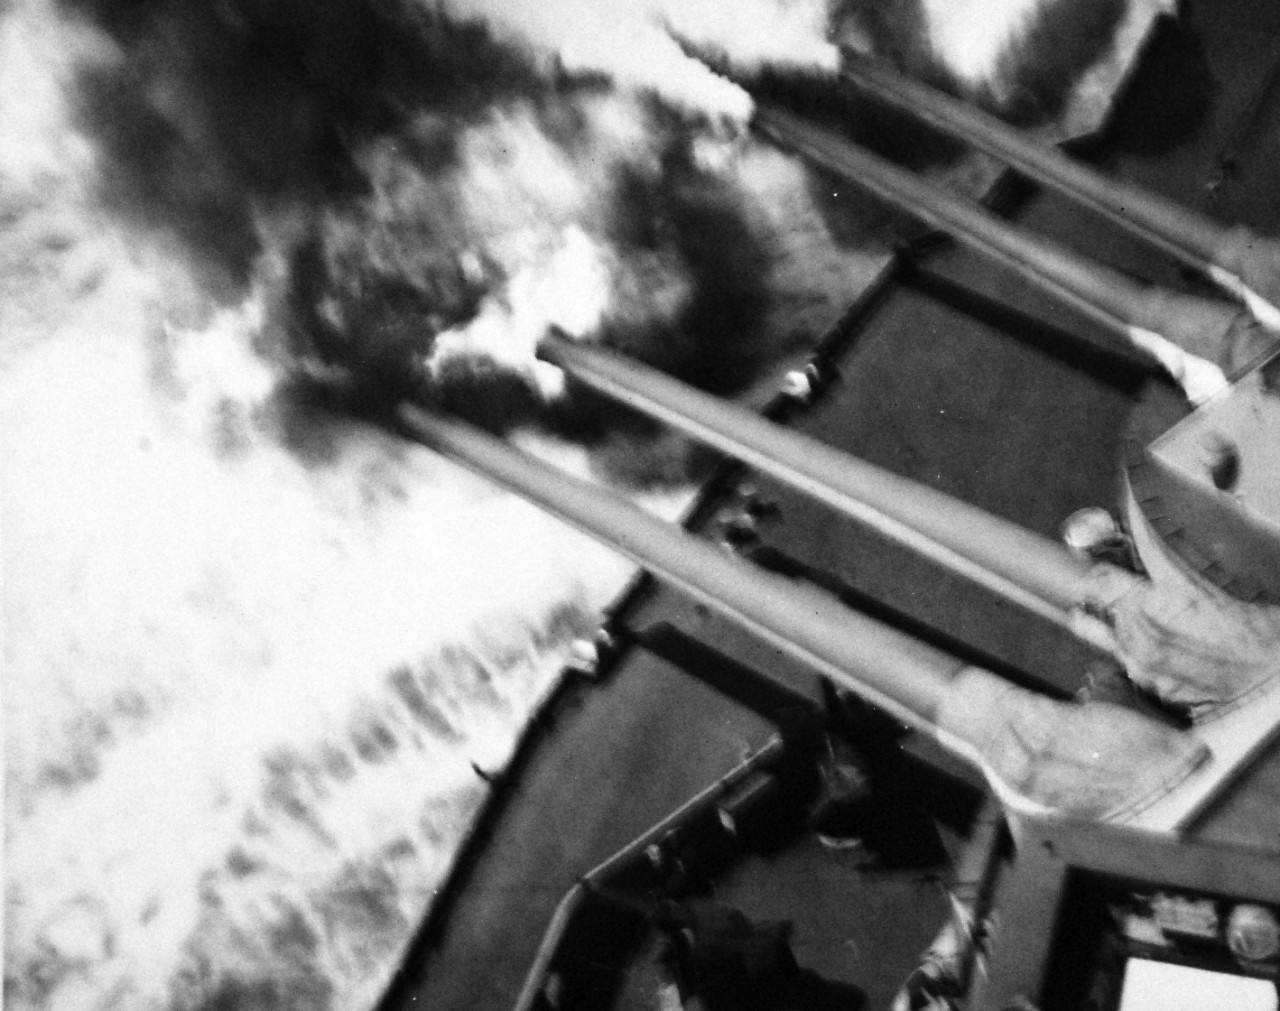 80-G-244215:  Normandy Invasion, U.S. Navy Ships, June 1944.    USS Arkansas (BB-33) fires a broadside at the enemy at Normandy, France, during the invasion, June 6, 1944.  Official U.S. Navy photograph, now in the collections of the National Archives.  (2016/10/04).